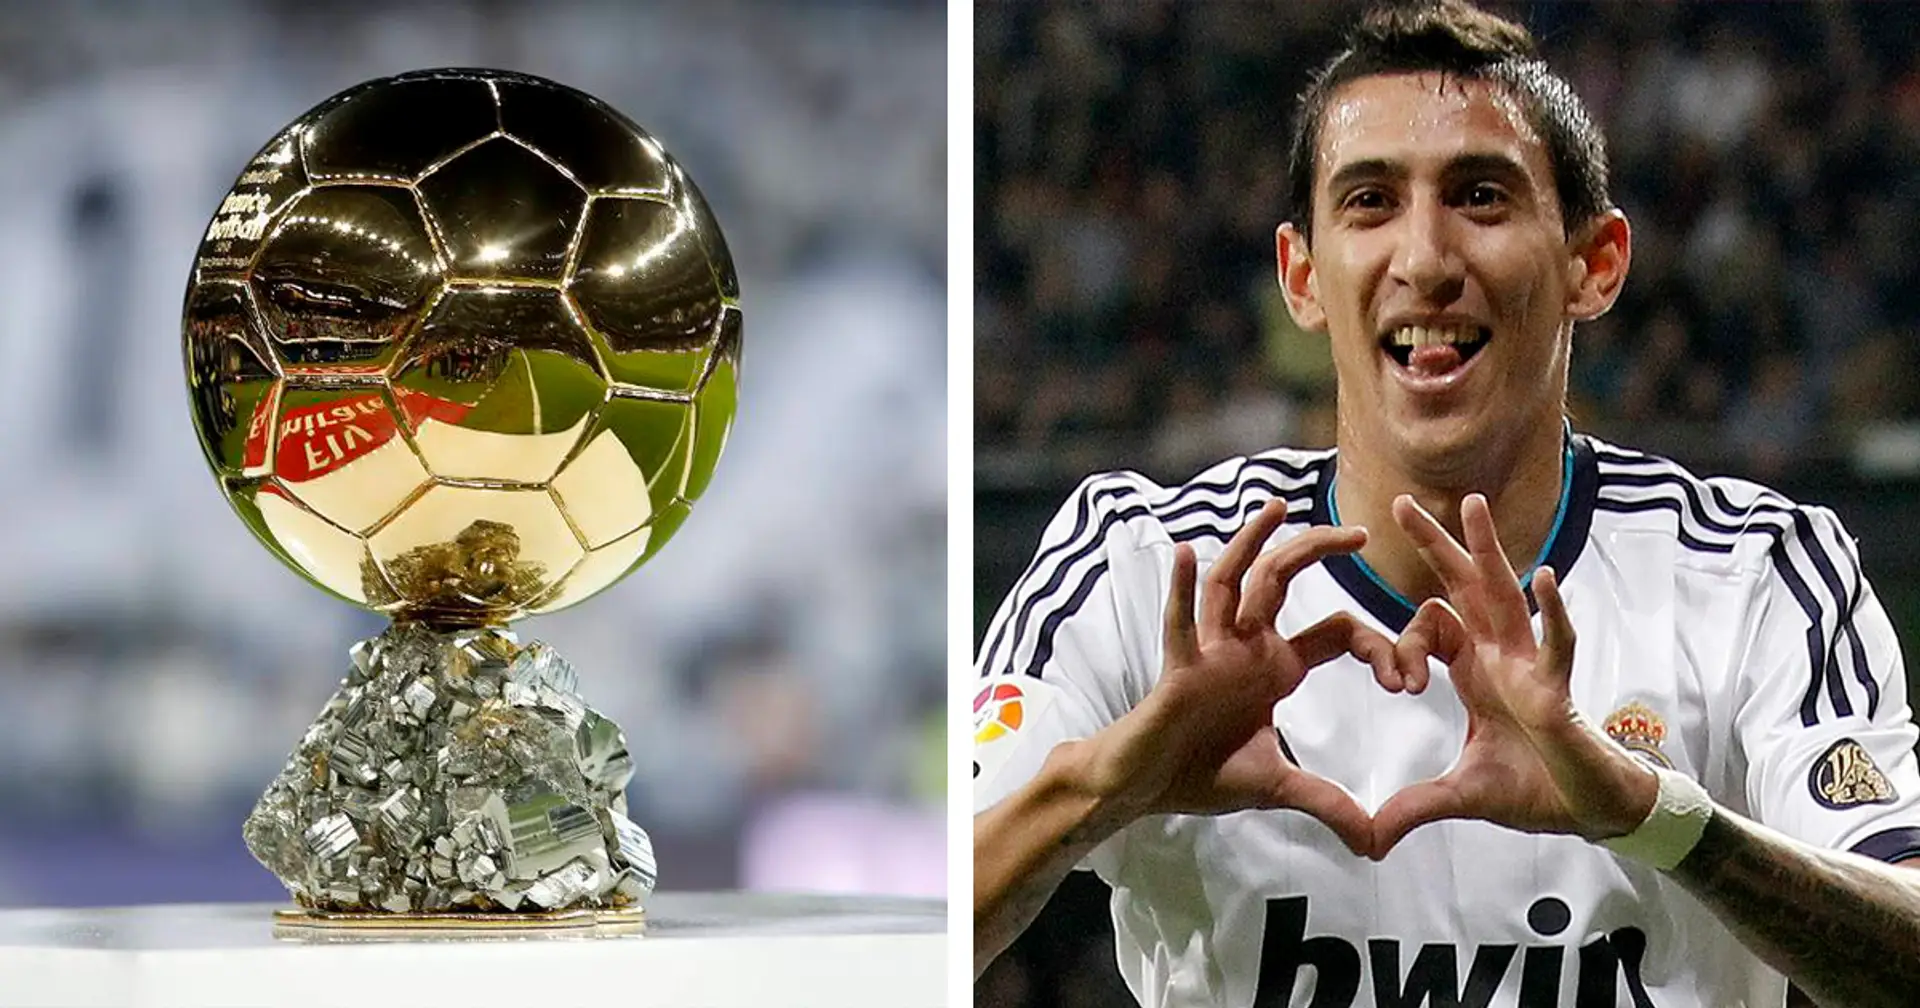 📝 Has Di Maria's 'Ballon d'Or' clause been the most useless contract provision ever?